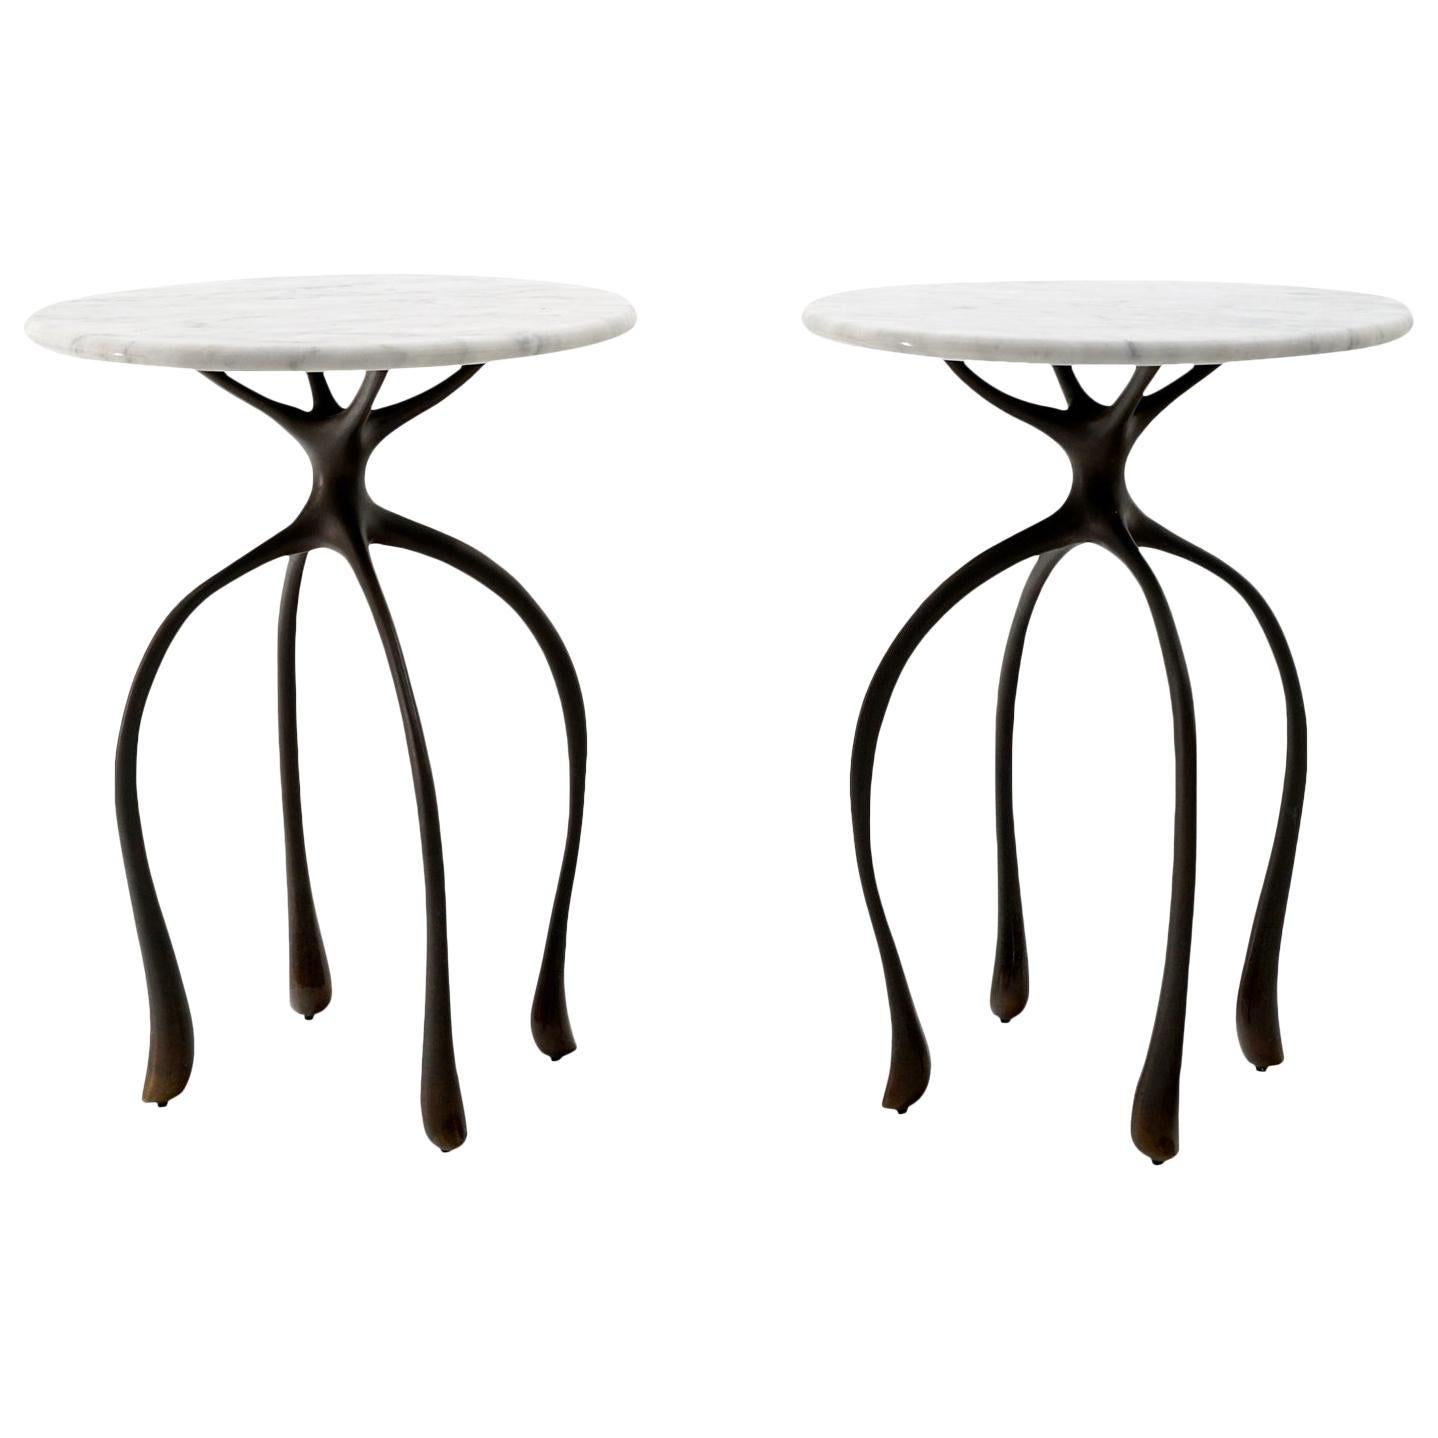 Pair of Marble and Cast Bronze "Moonshine" Side Tables by Jordan Mozer